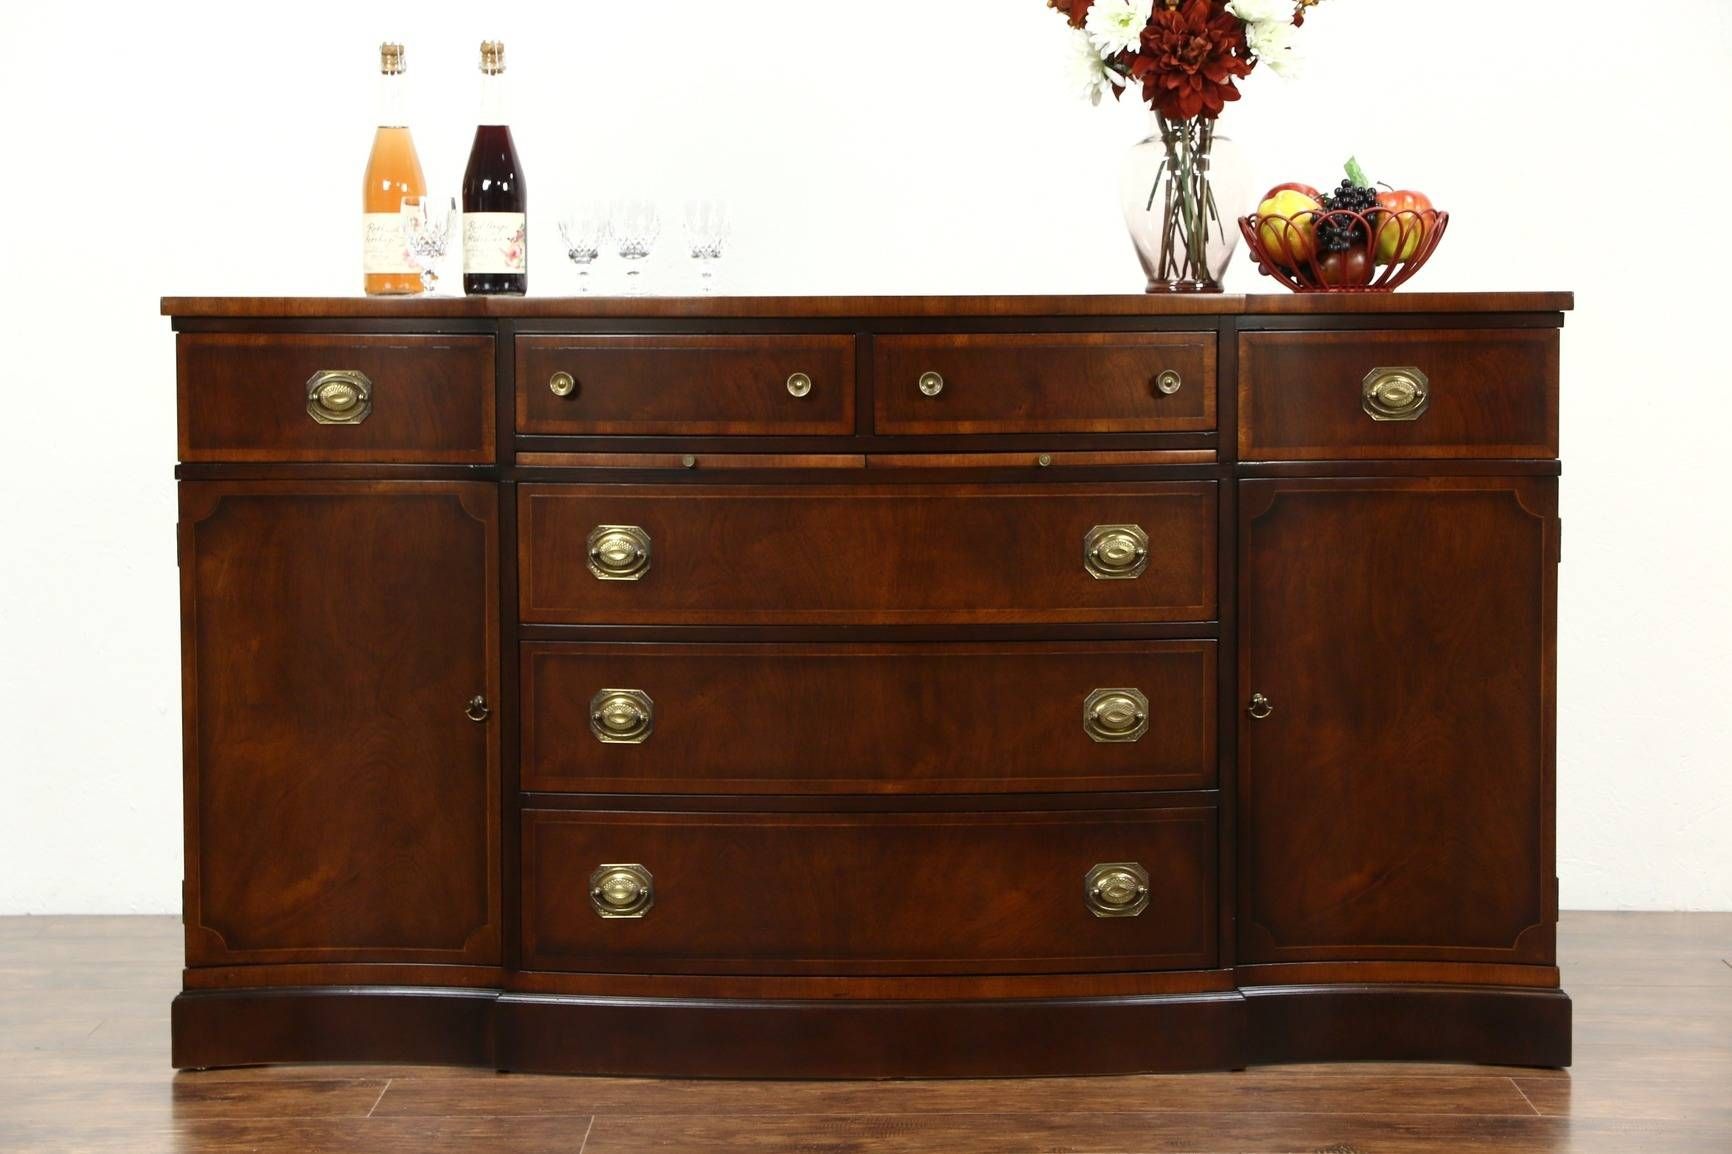 Sold – Traditional Mahogany Sideboard, Server Or Buffet, Signed With Regard To Traditional Sideboard (View 12 of 20)